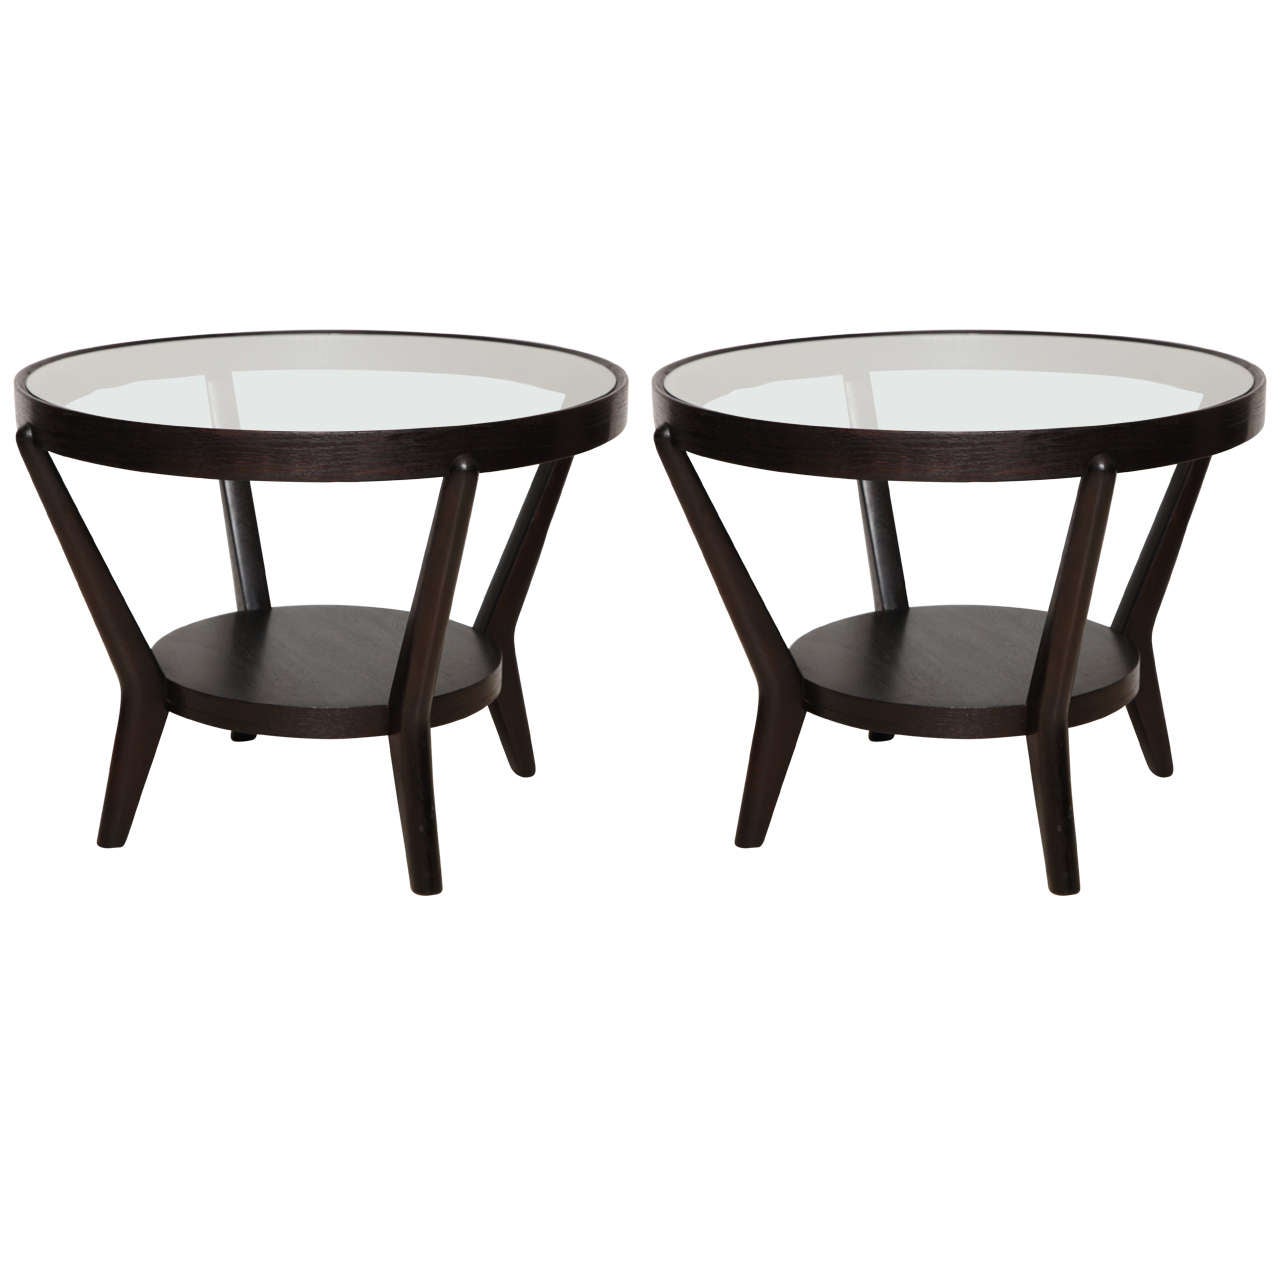 Pair of Jindrich Halabala Round Oak Tables with Glass Tops circa 1940